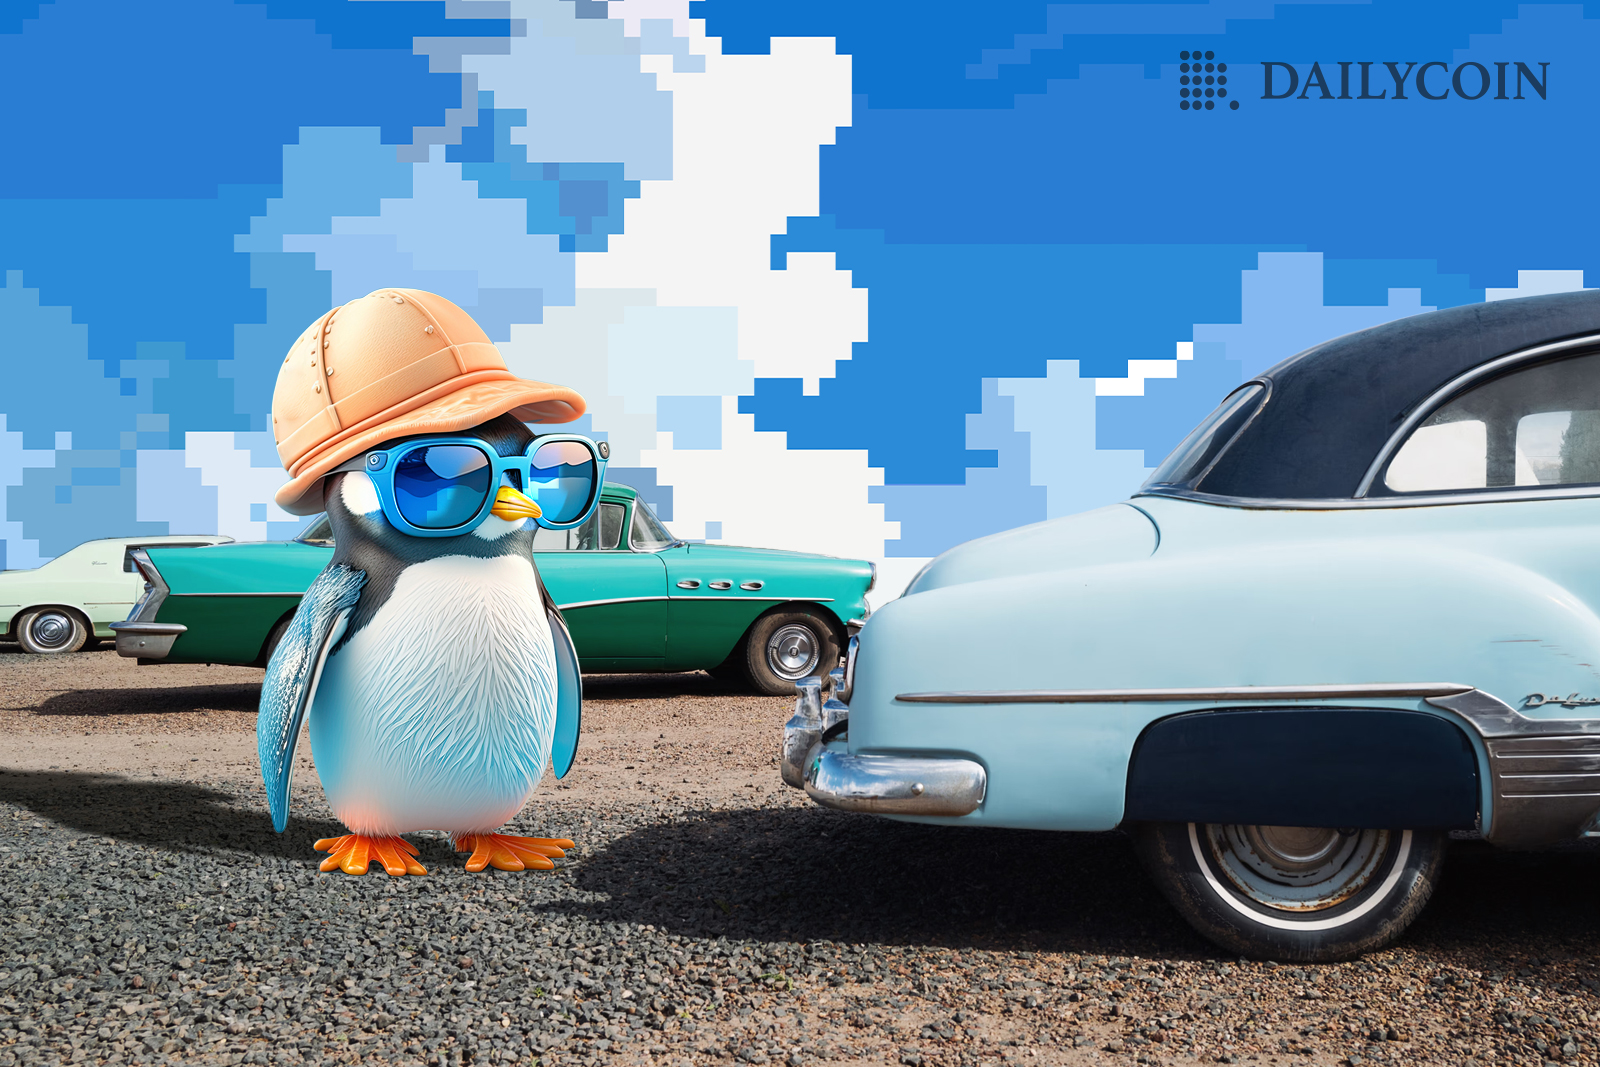 Small NFT penguin wearing sunglasses and a cap standing at a parking lot.